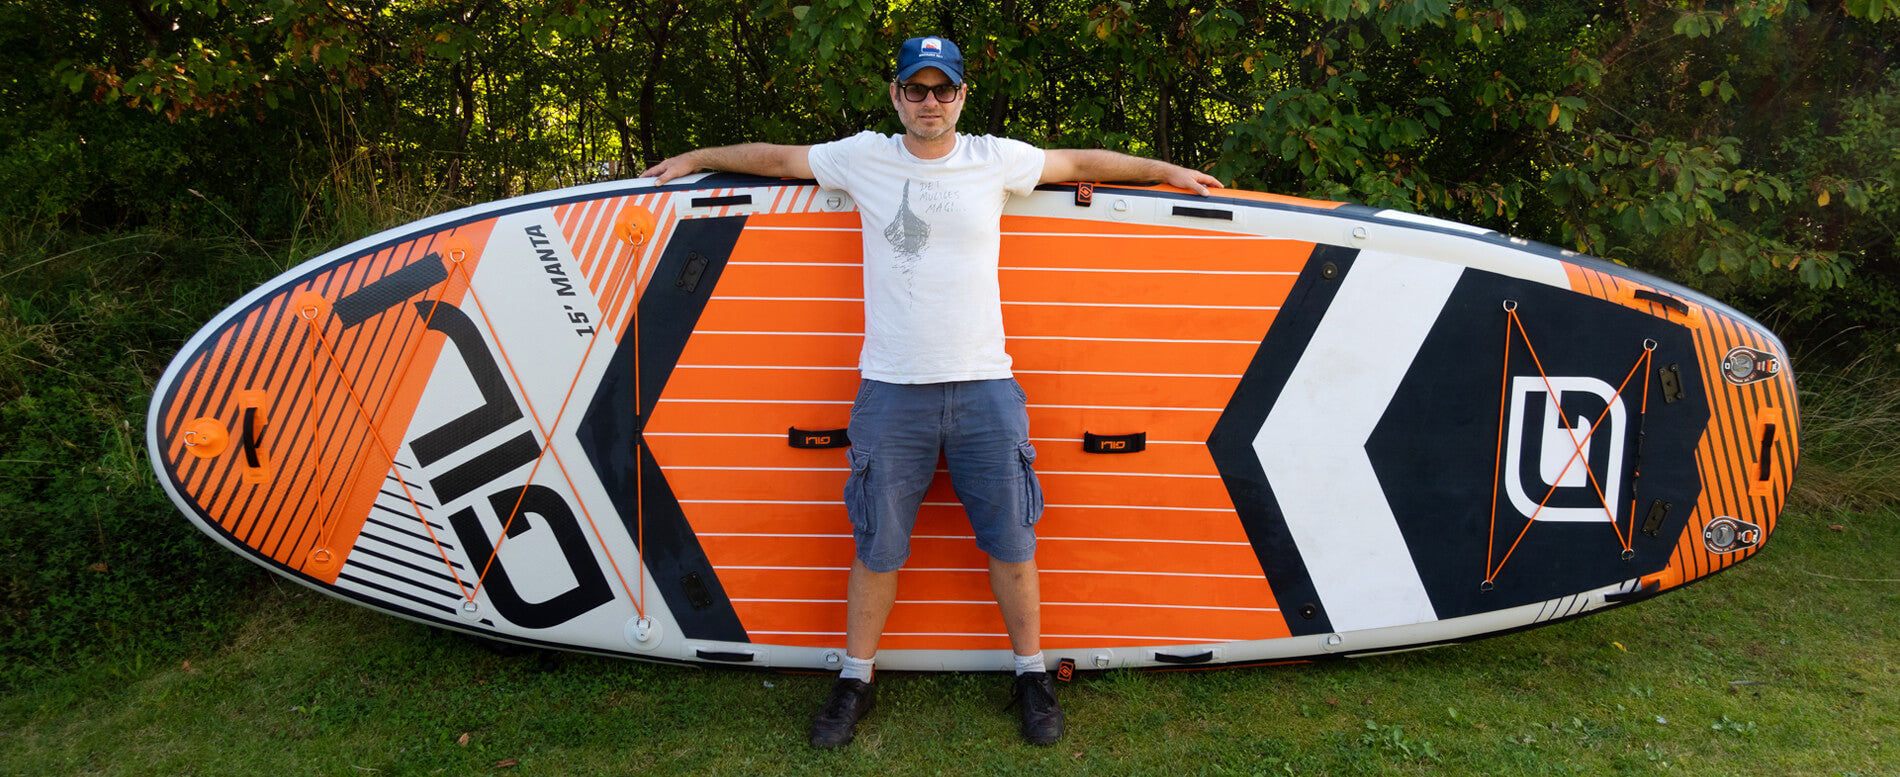 DiveIn review of GILI Sports Inflatable paddle board